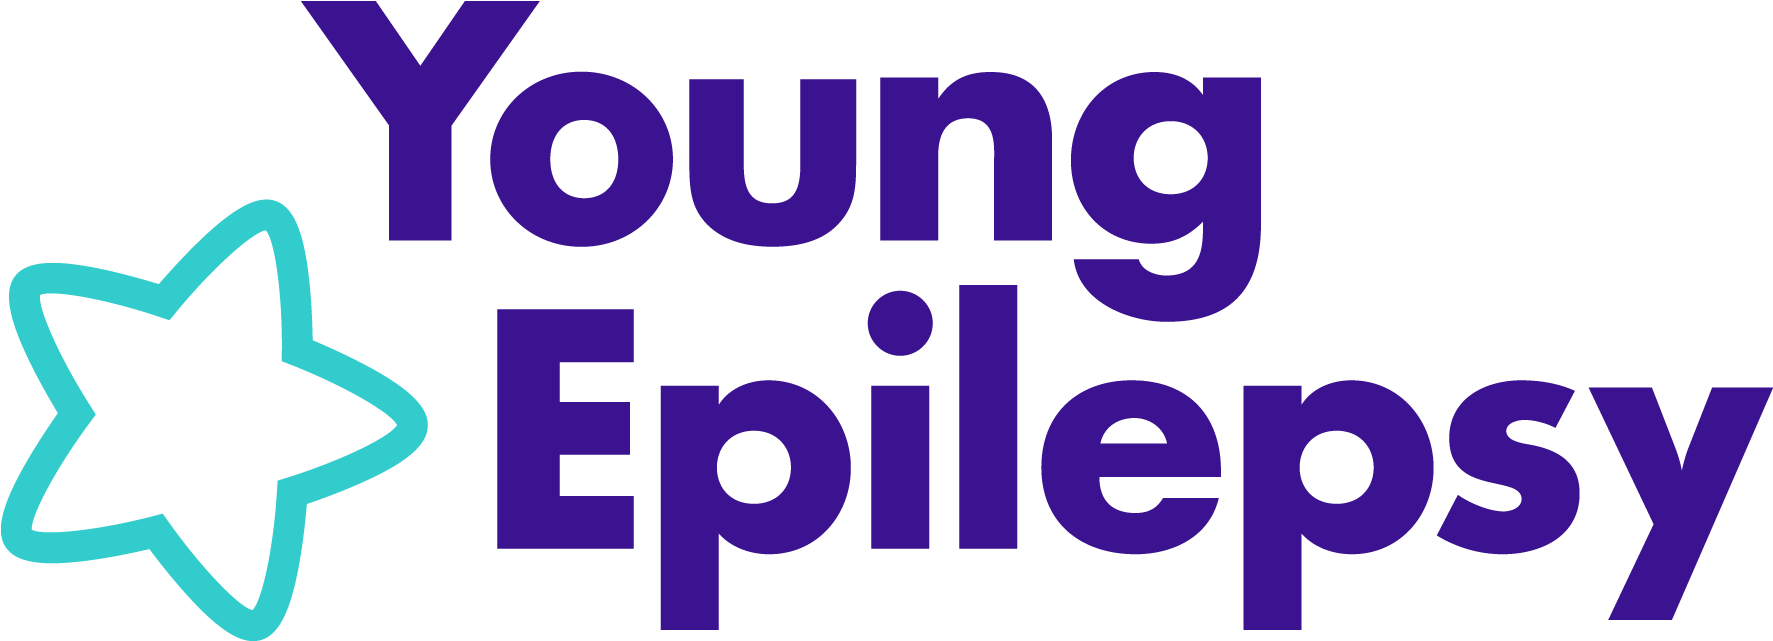 In The Moment - Young Epilepsy Logo (1890x709)